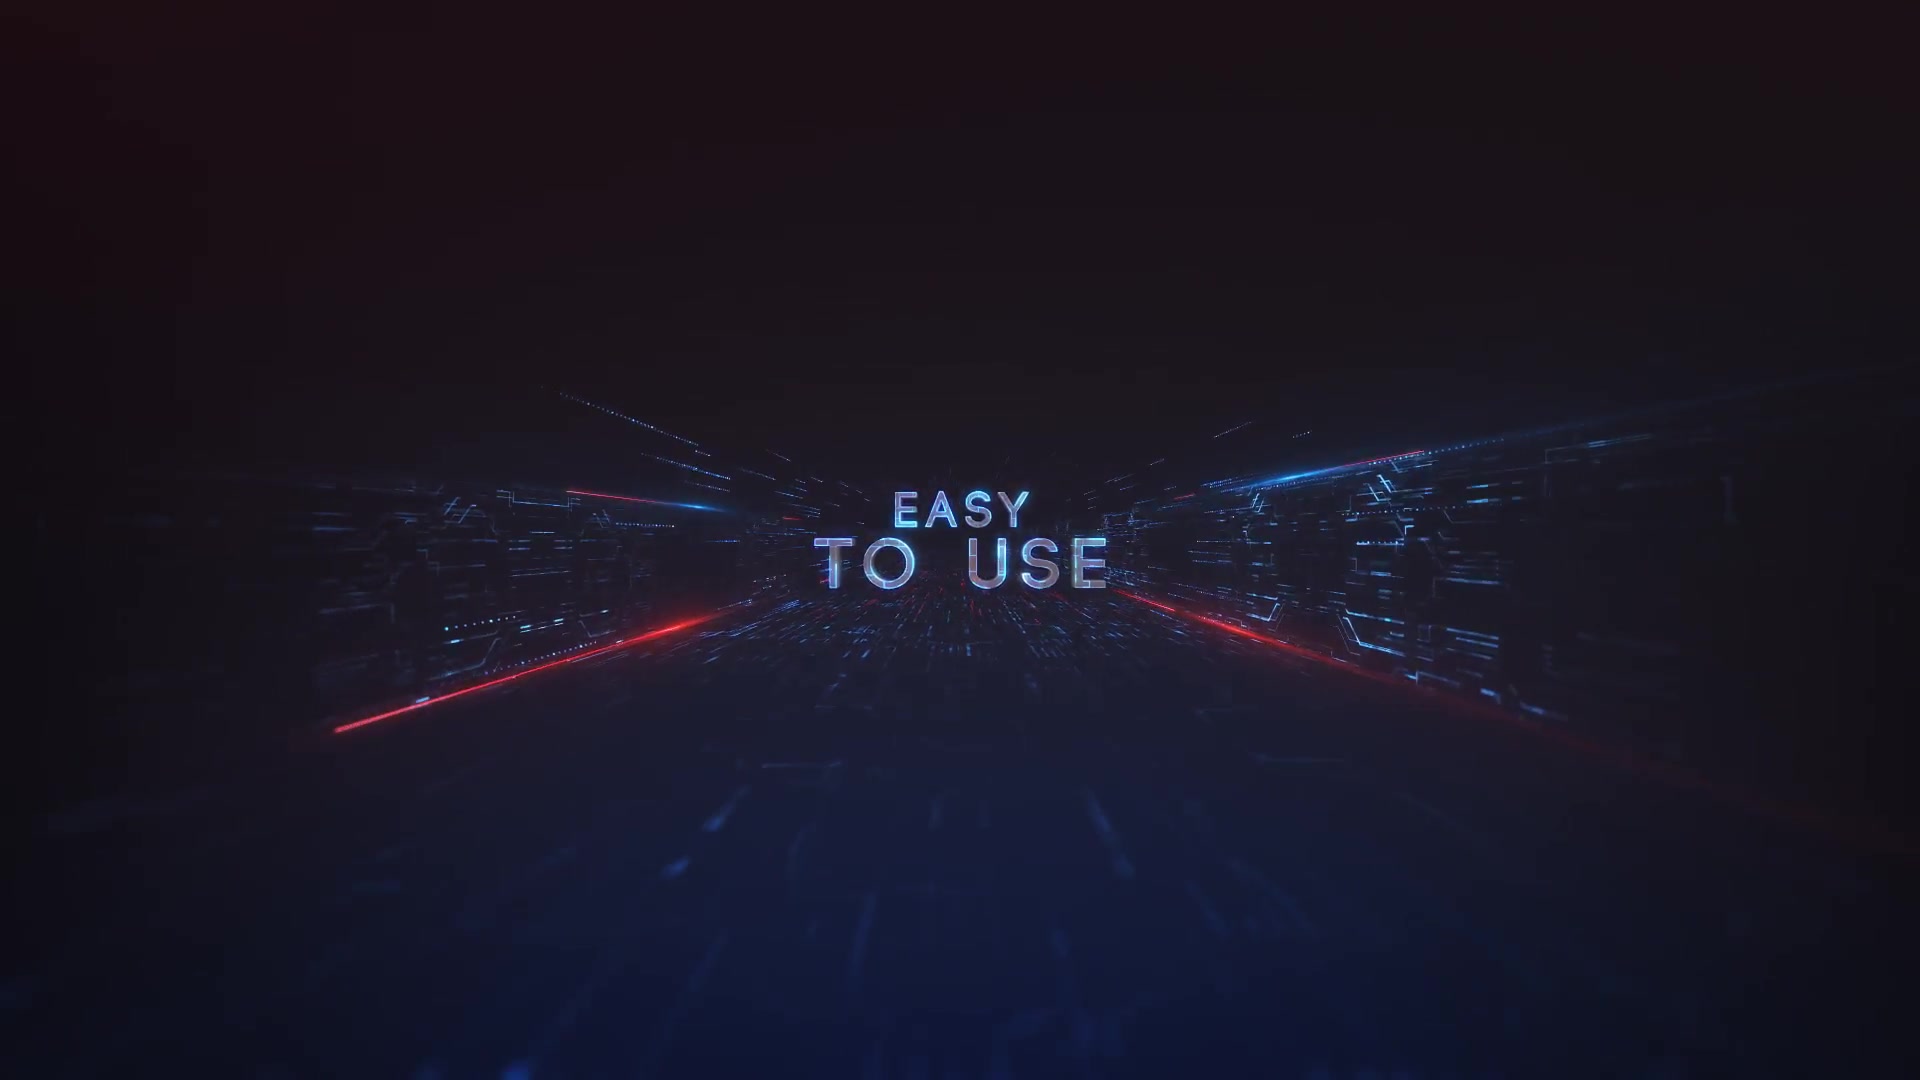 Future Action Titles - Download Videohive 20367378